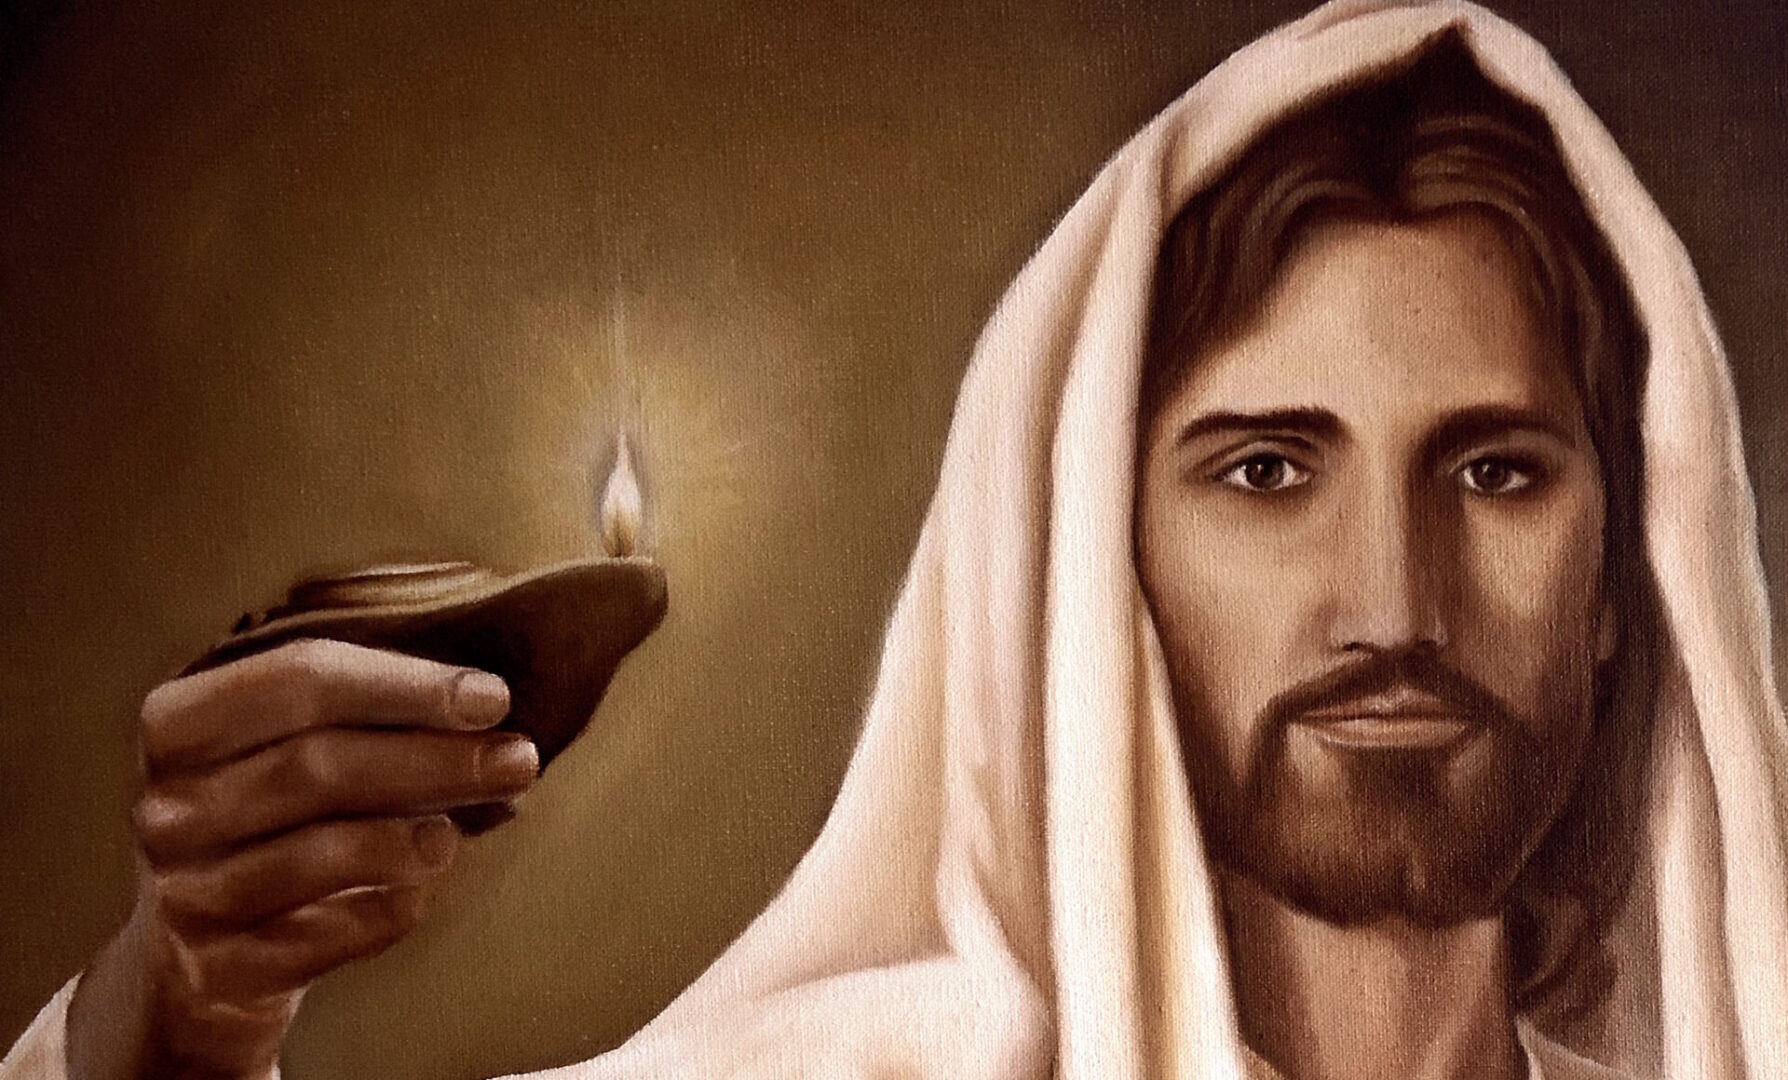 Painting art of jesus holding lighted diva on his hand